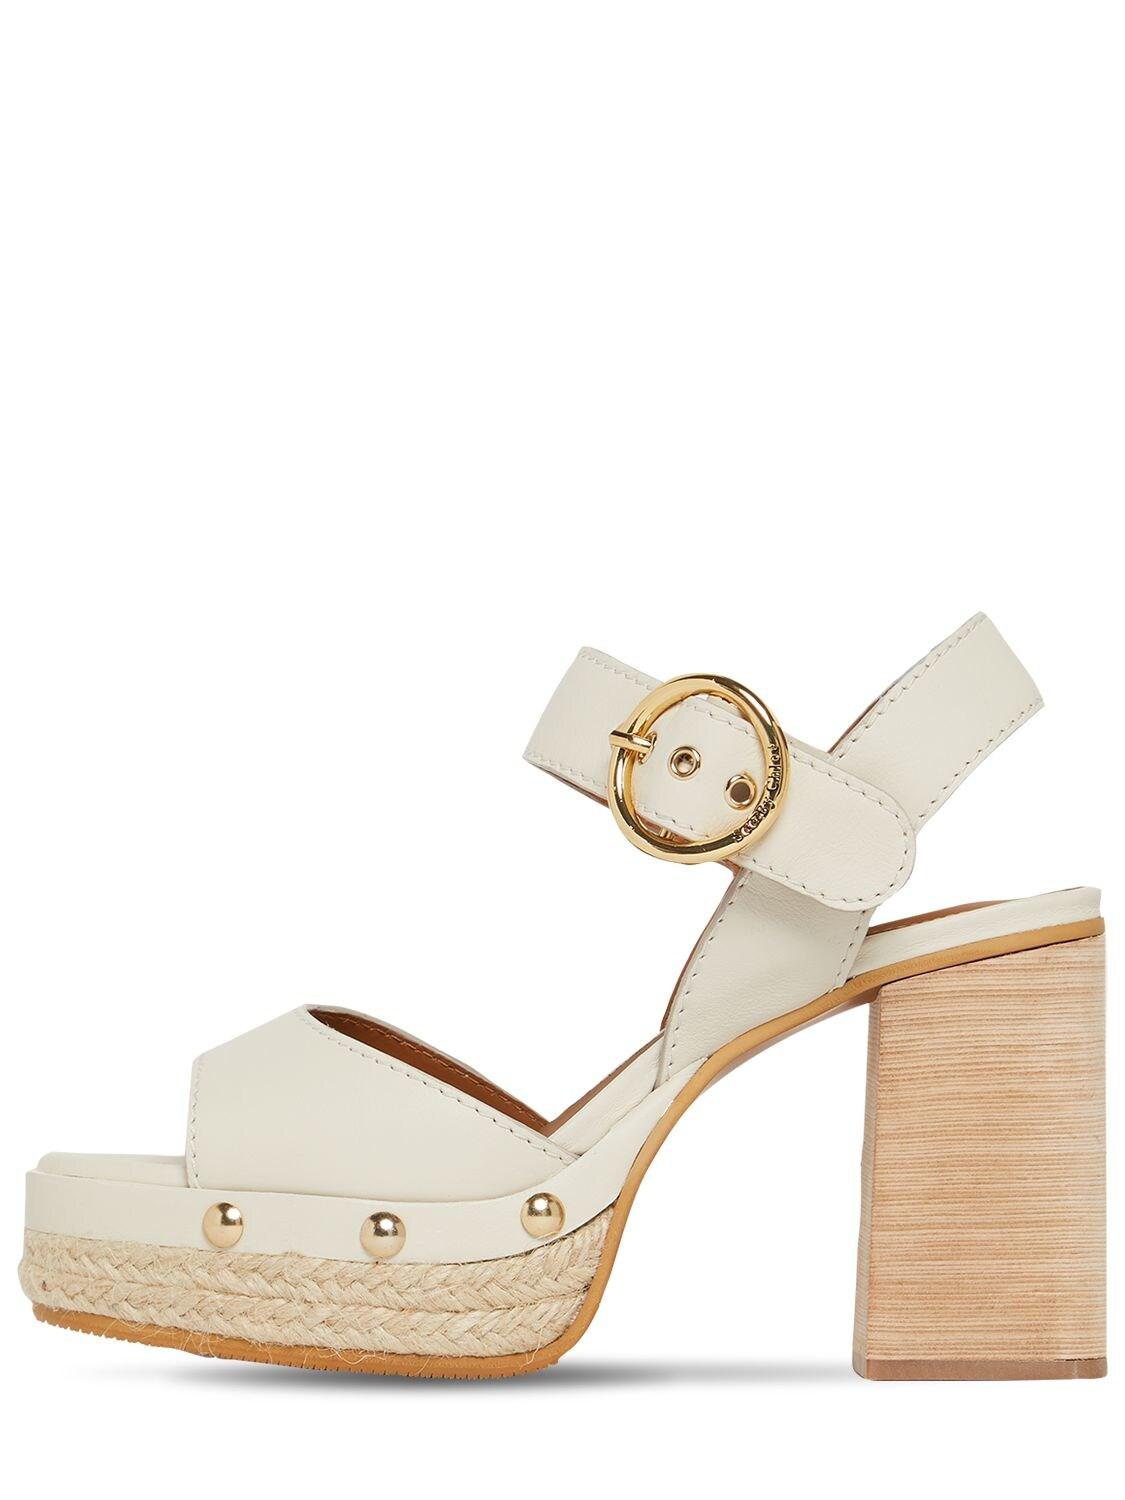 See By Chloé 105mm Viviane Leather Platform Sandals in White Lyst